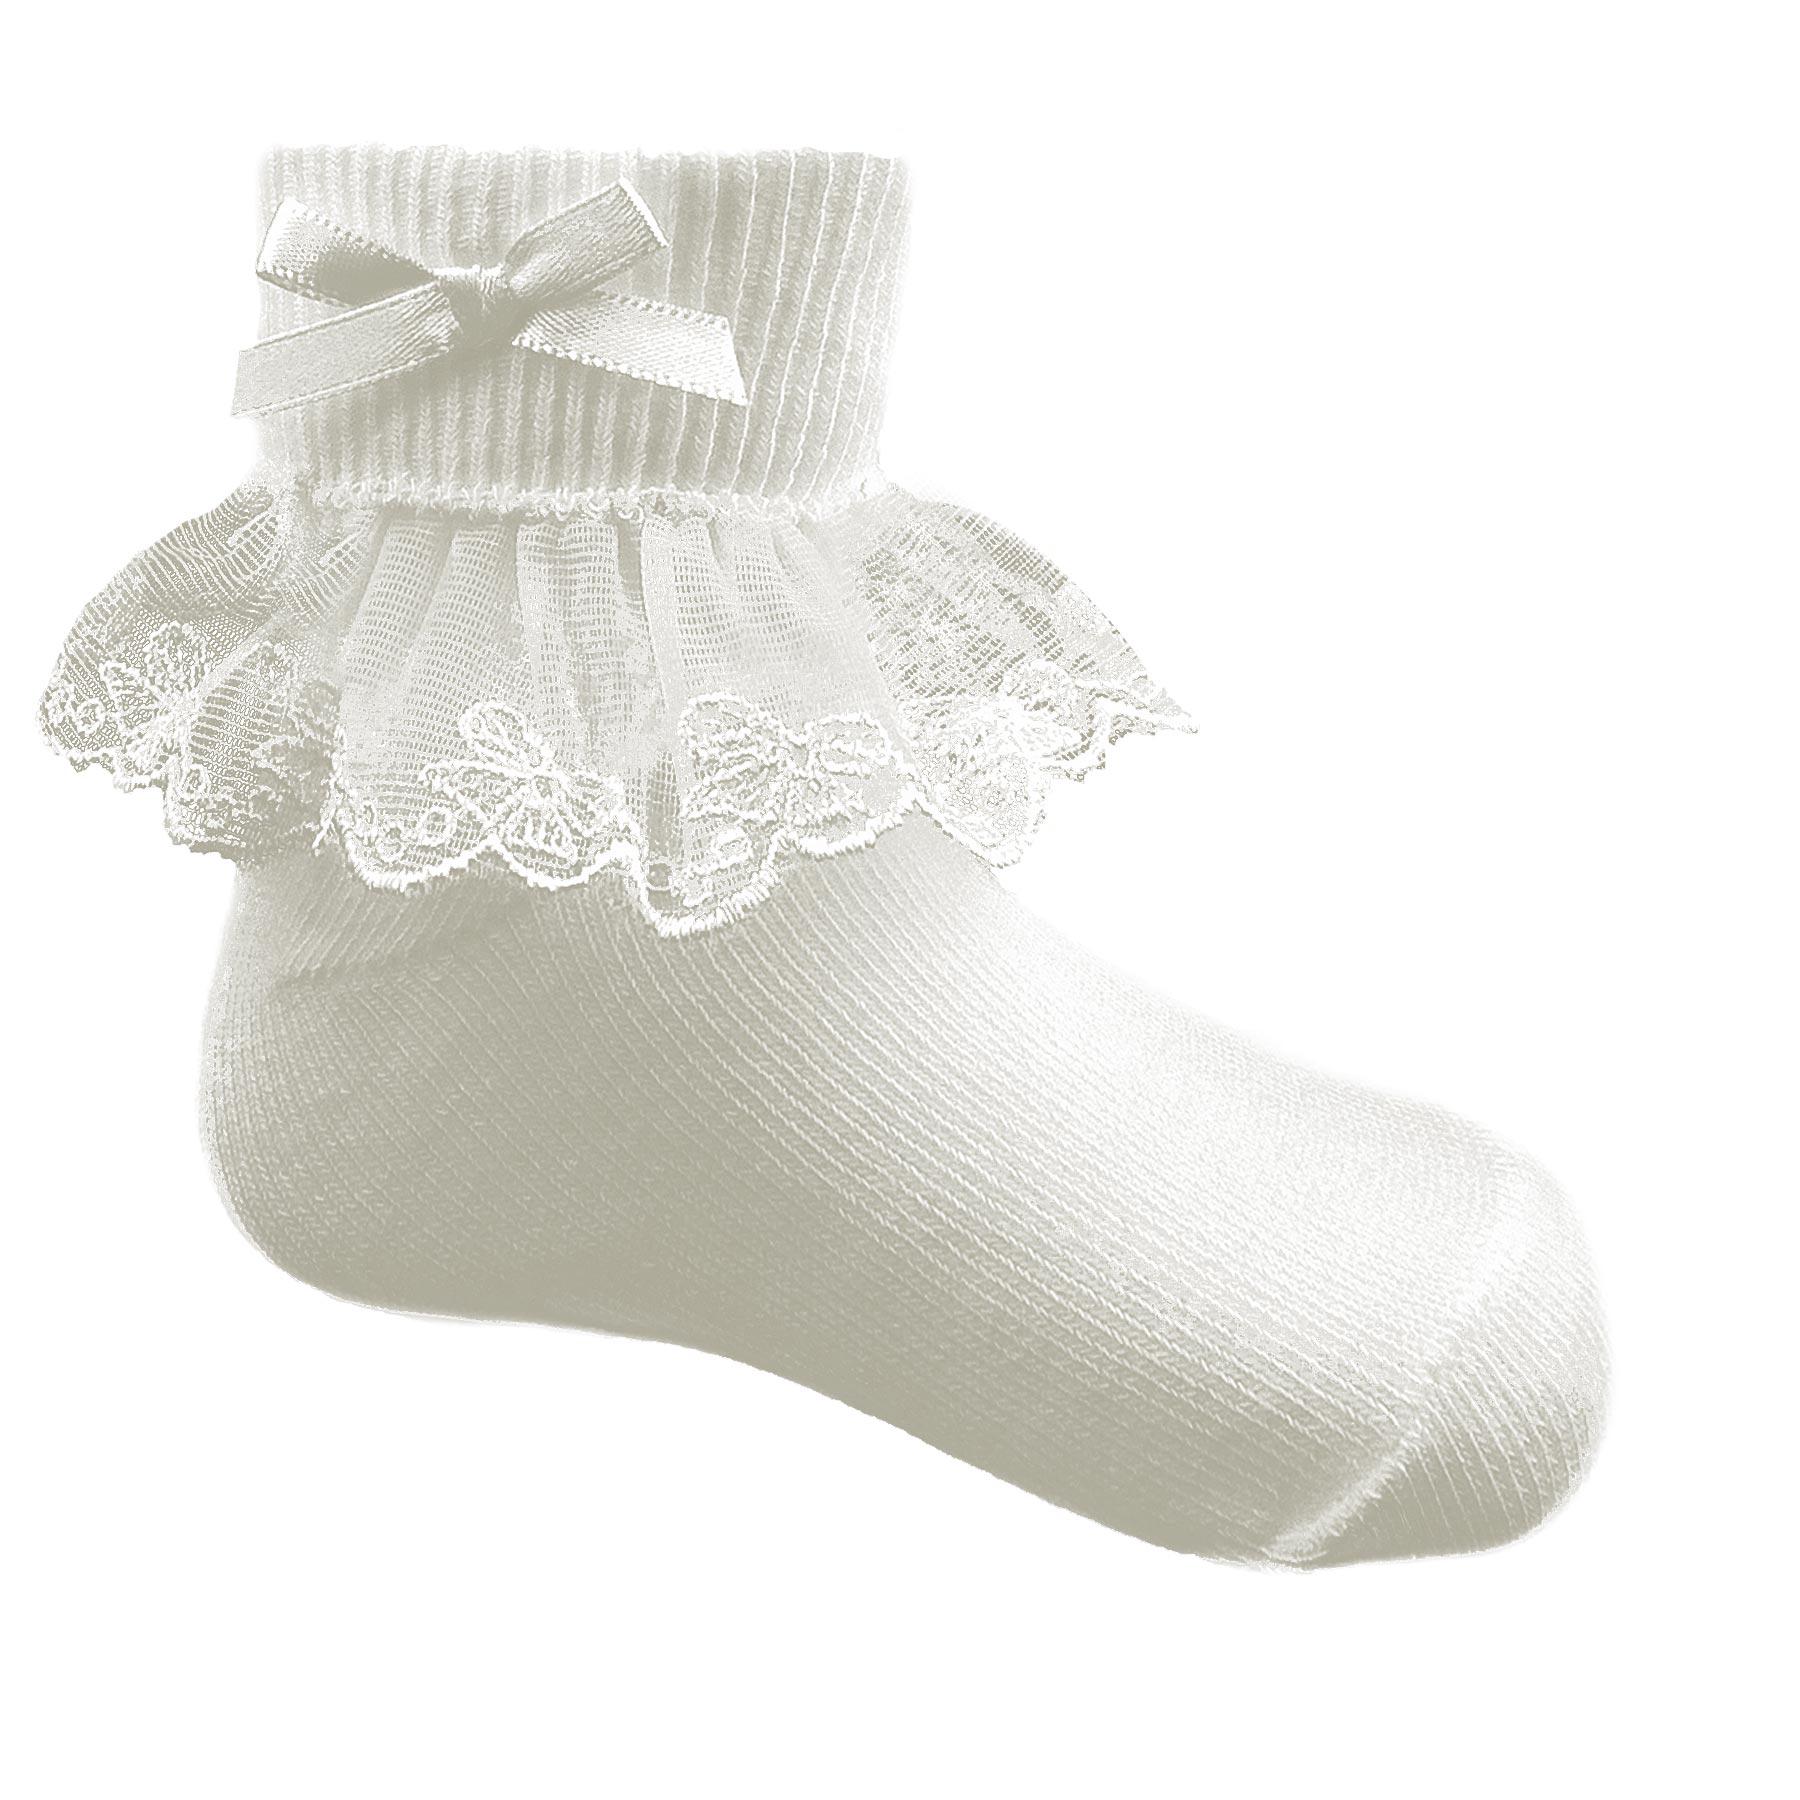 Pex Kids Lace & Bow Ankle Socks in Ivory